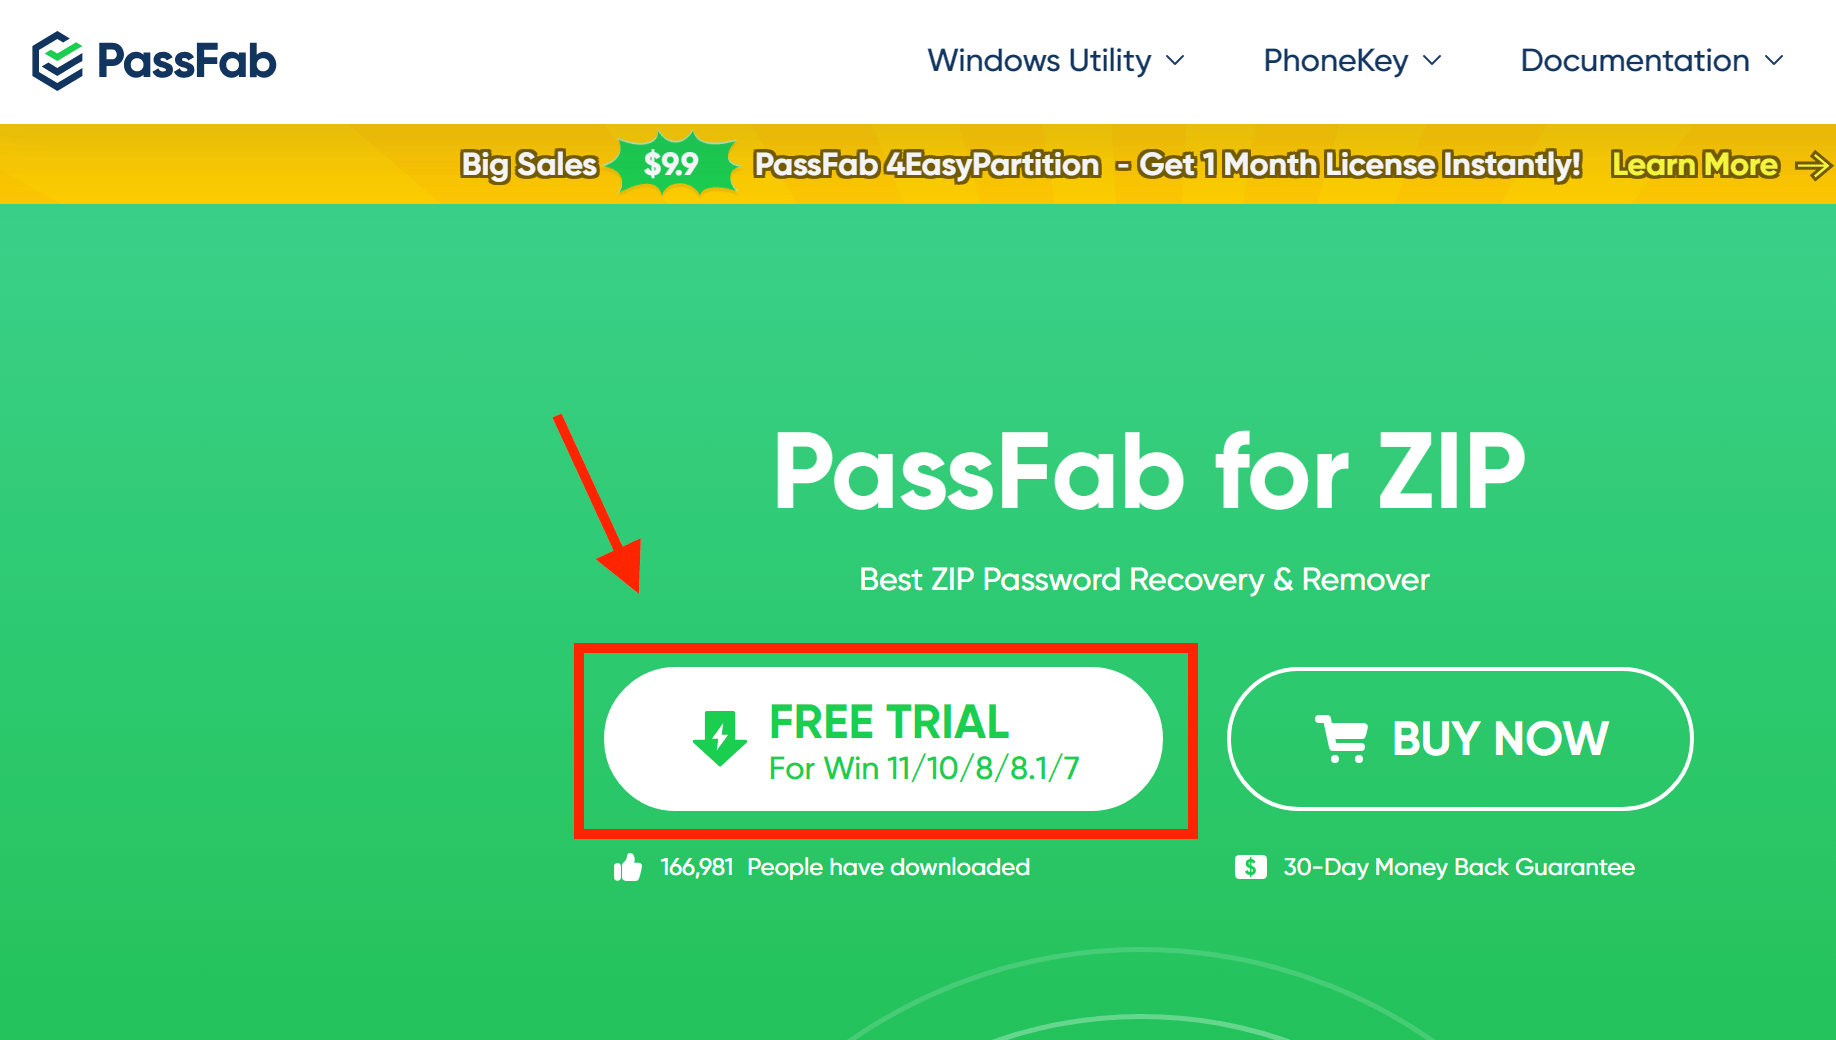 How To Use PassFab for ZIP: Step 1